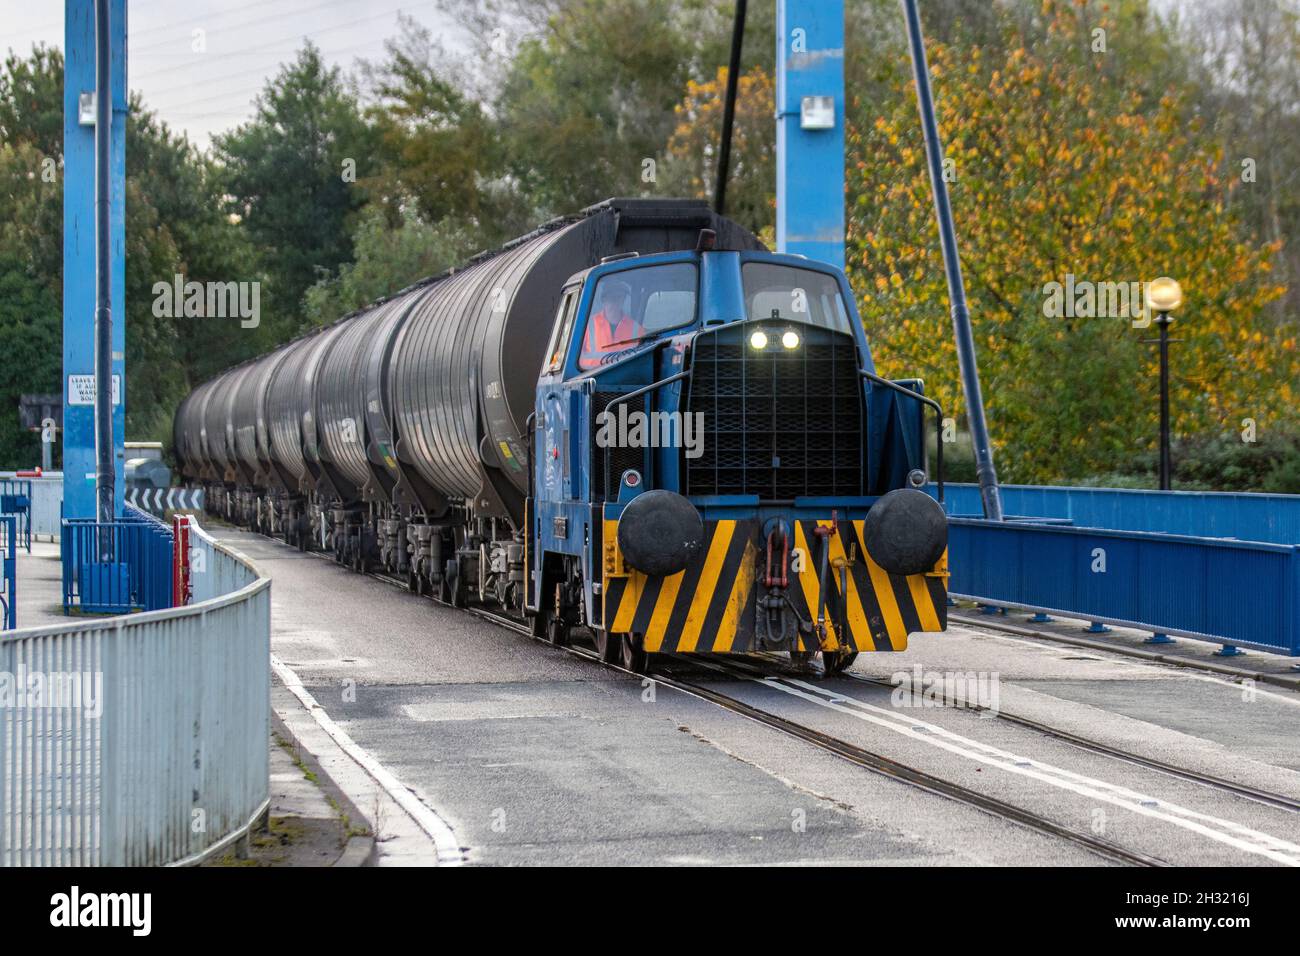 Ribble Rail crude 'Bitumen tankers' hauled by 60096 Sentinel diesel 'Progress' shunting locos, used to Shunt VTG Wagon hire flammable tar into the Total Fina Elf plant for discharge, processing, and onward distribution by road. Preston, UK Stock Photo